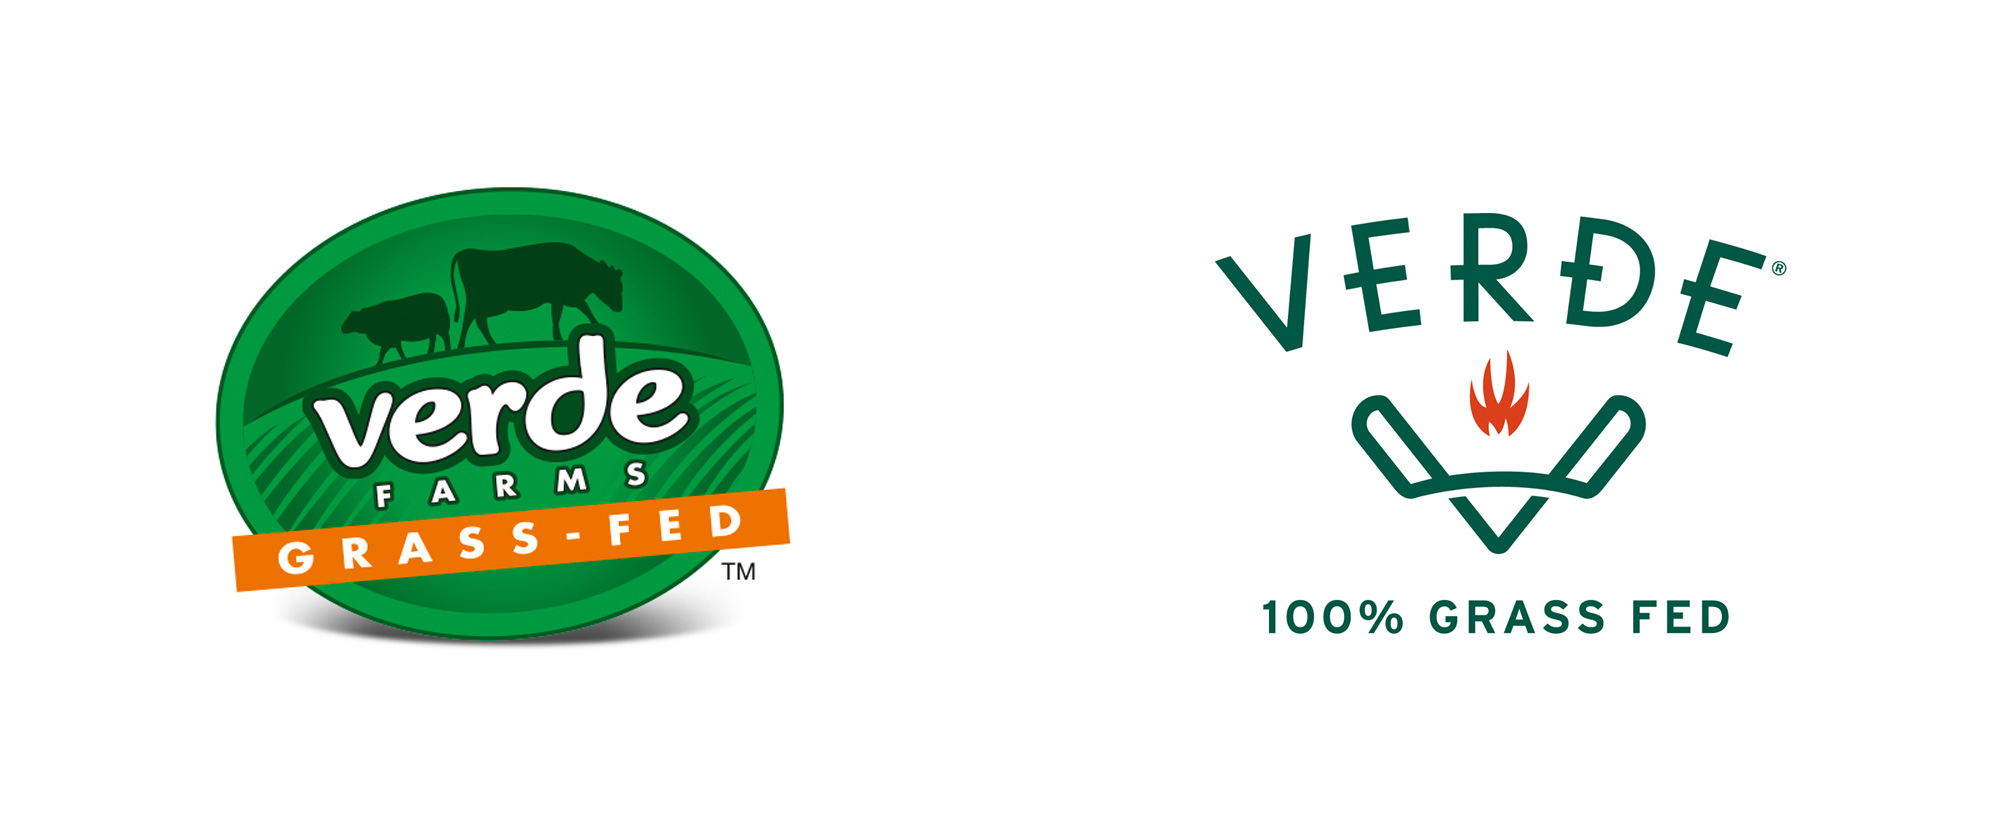 New Logo and Packaging for Verde Farms by Ptarmak